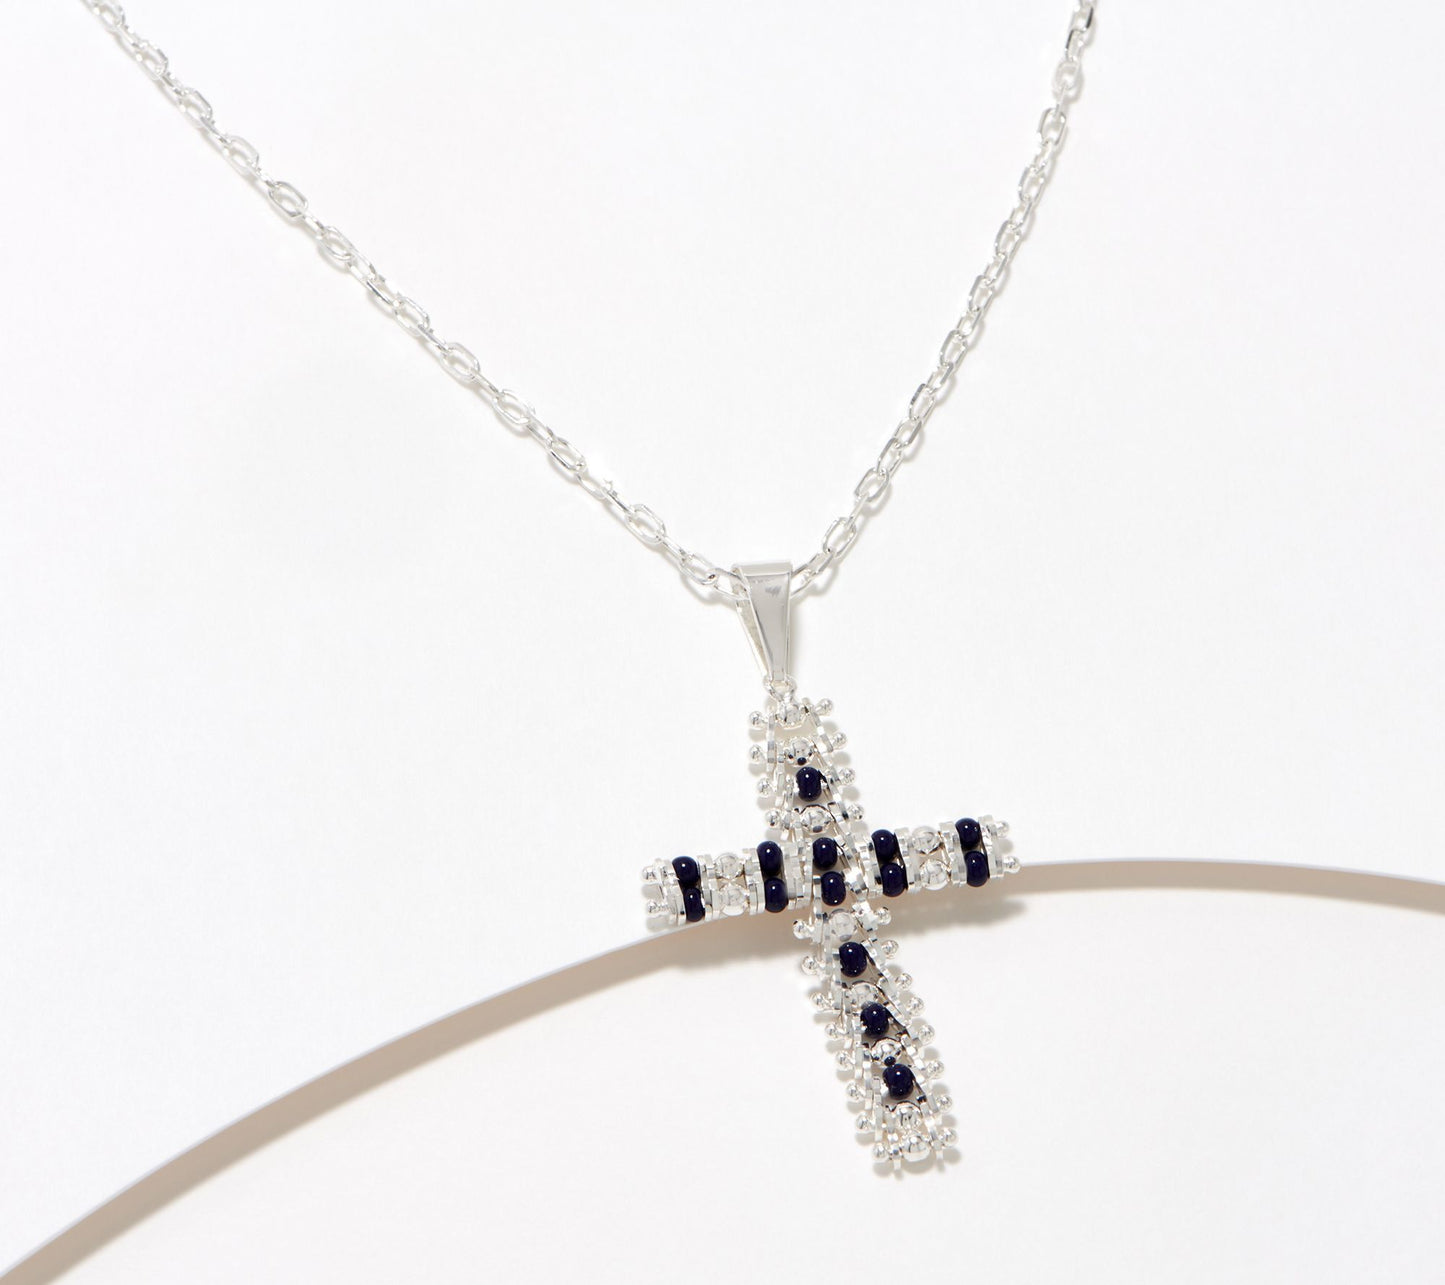 IMPERIAL 925 Sterling Silver DARK BLUE WHEAT LINK Necklace